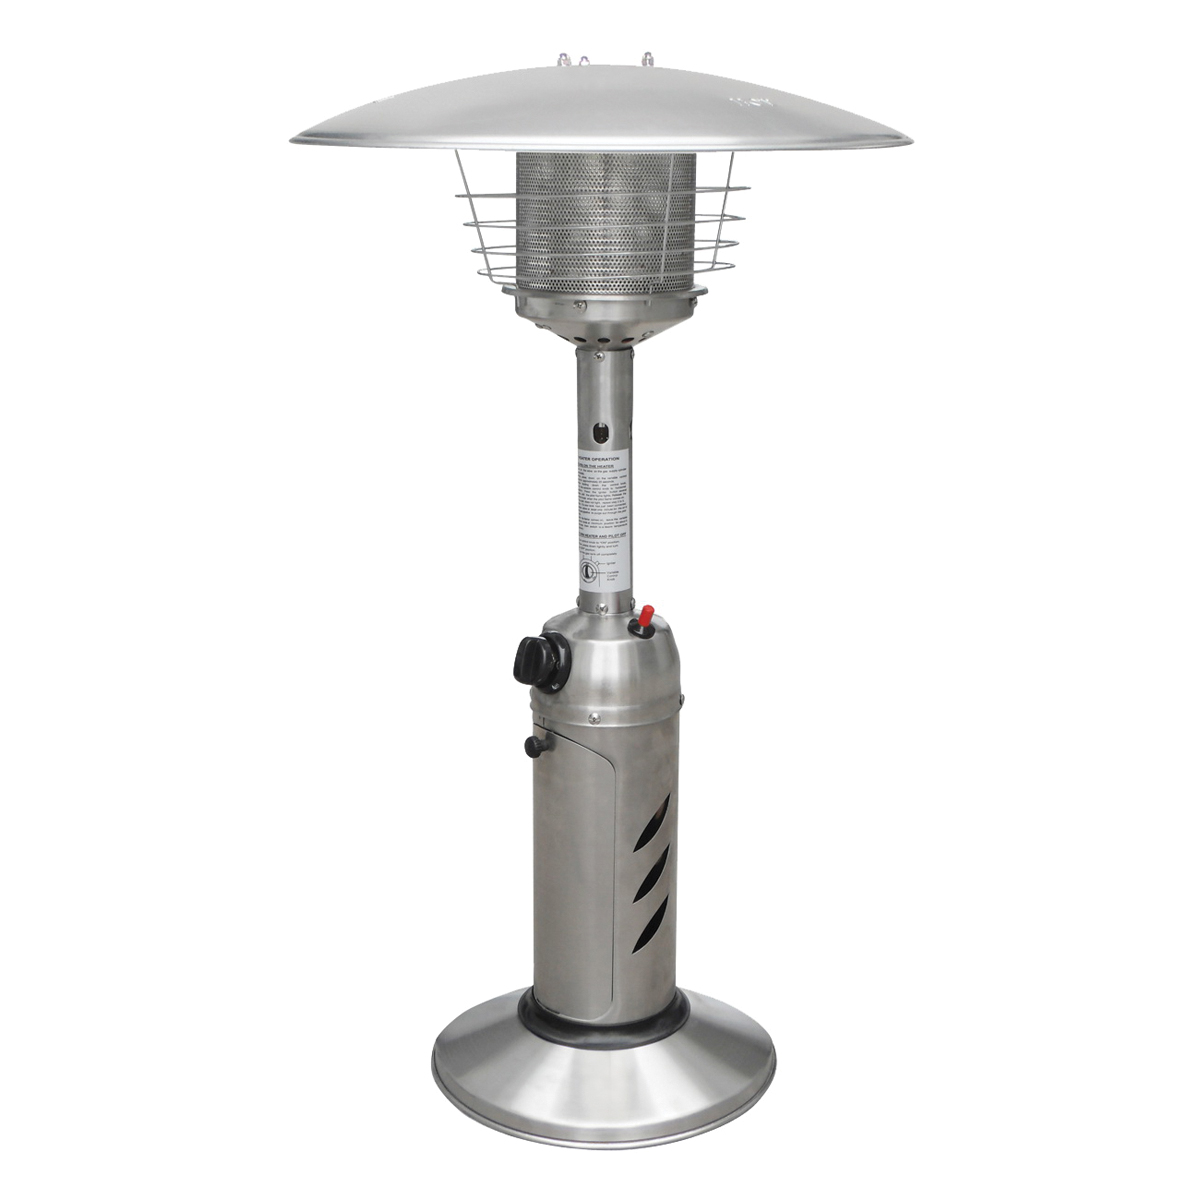 HPS-C-SS Portable Patio Heater, Liquid Propane or Butane Gas Only, Electric Ignition, 11000 Btu